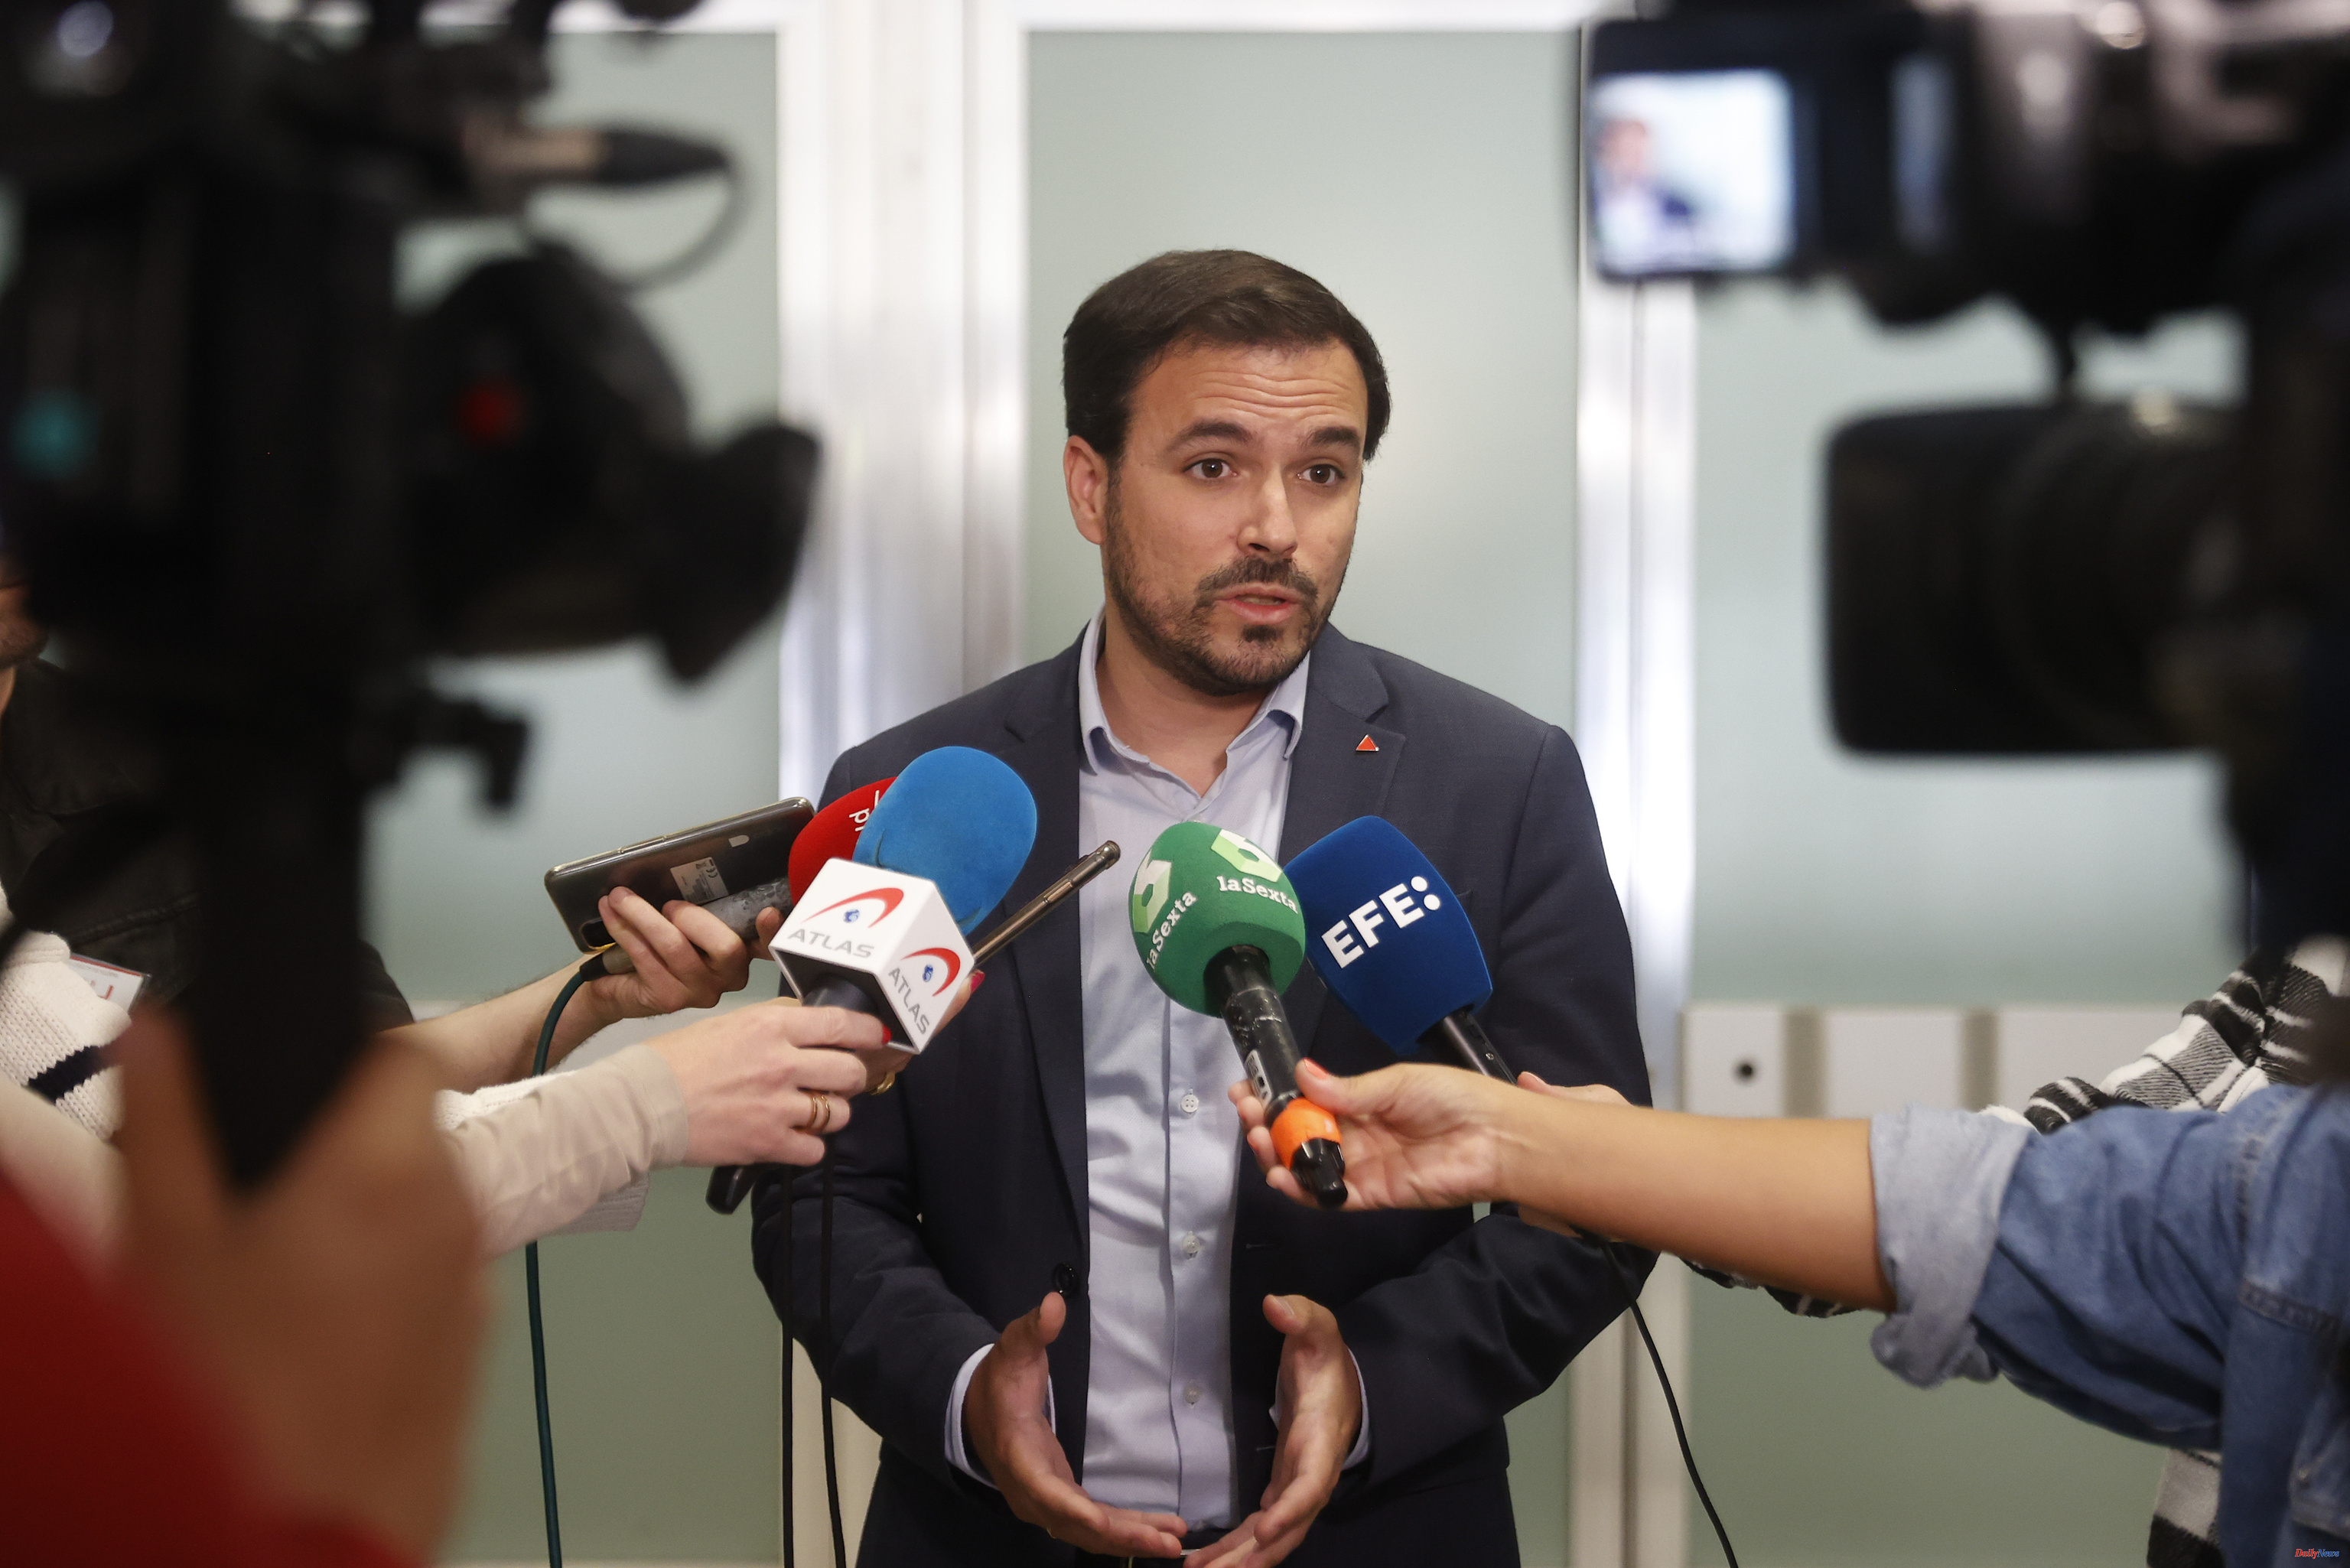 23-J Garzón renounces going on the Sumar lists to promote the "renewal of faces" and puts pressure on Irene Montero and Pablo Echenique